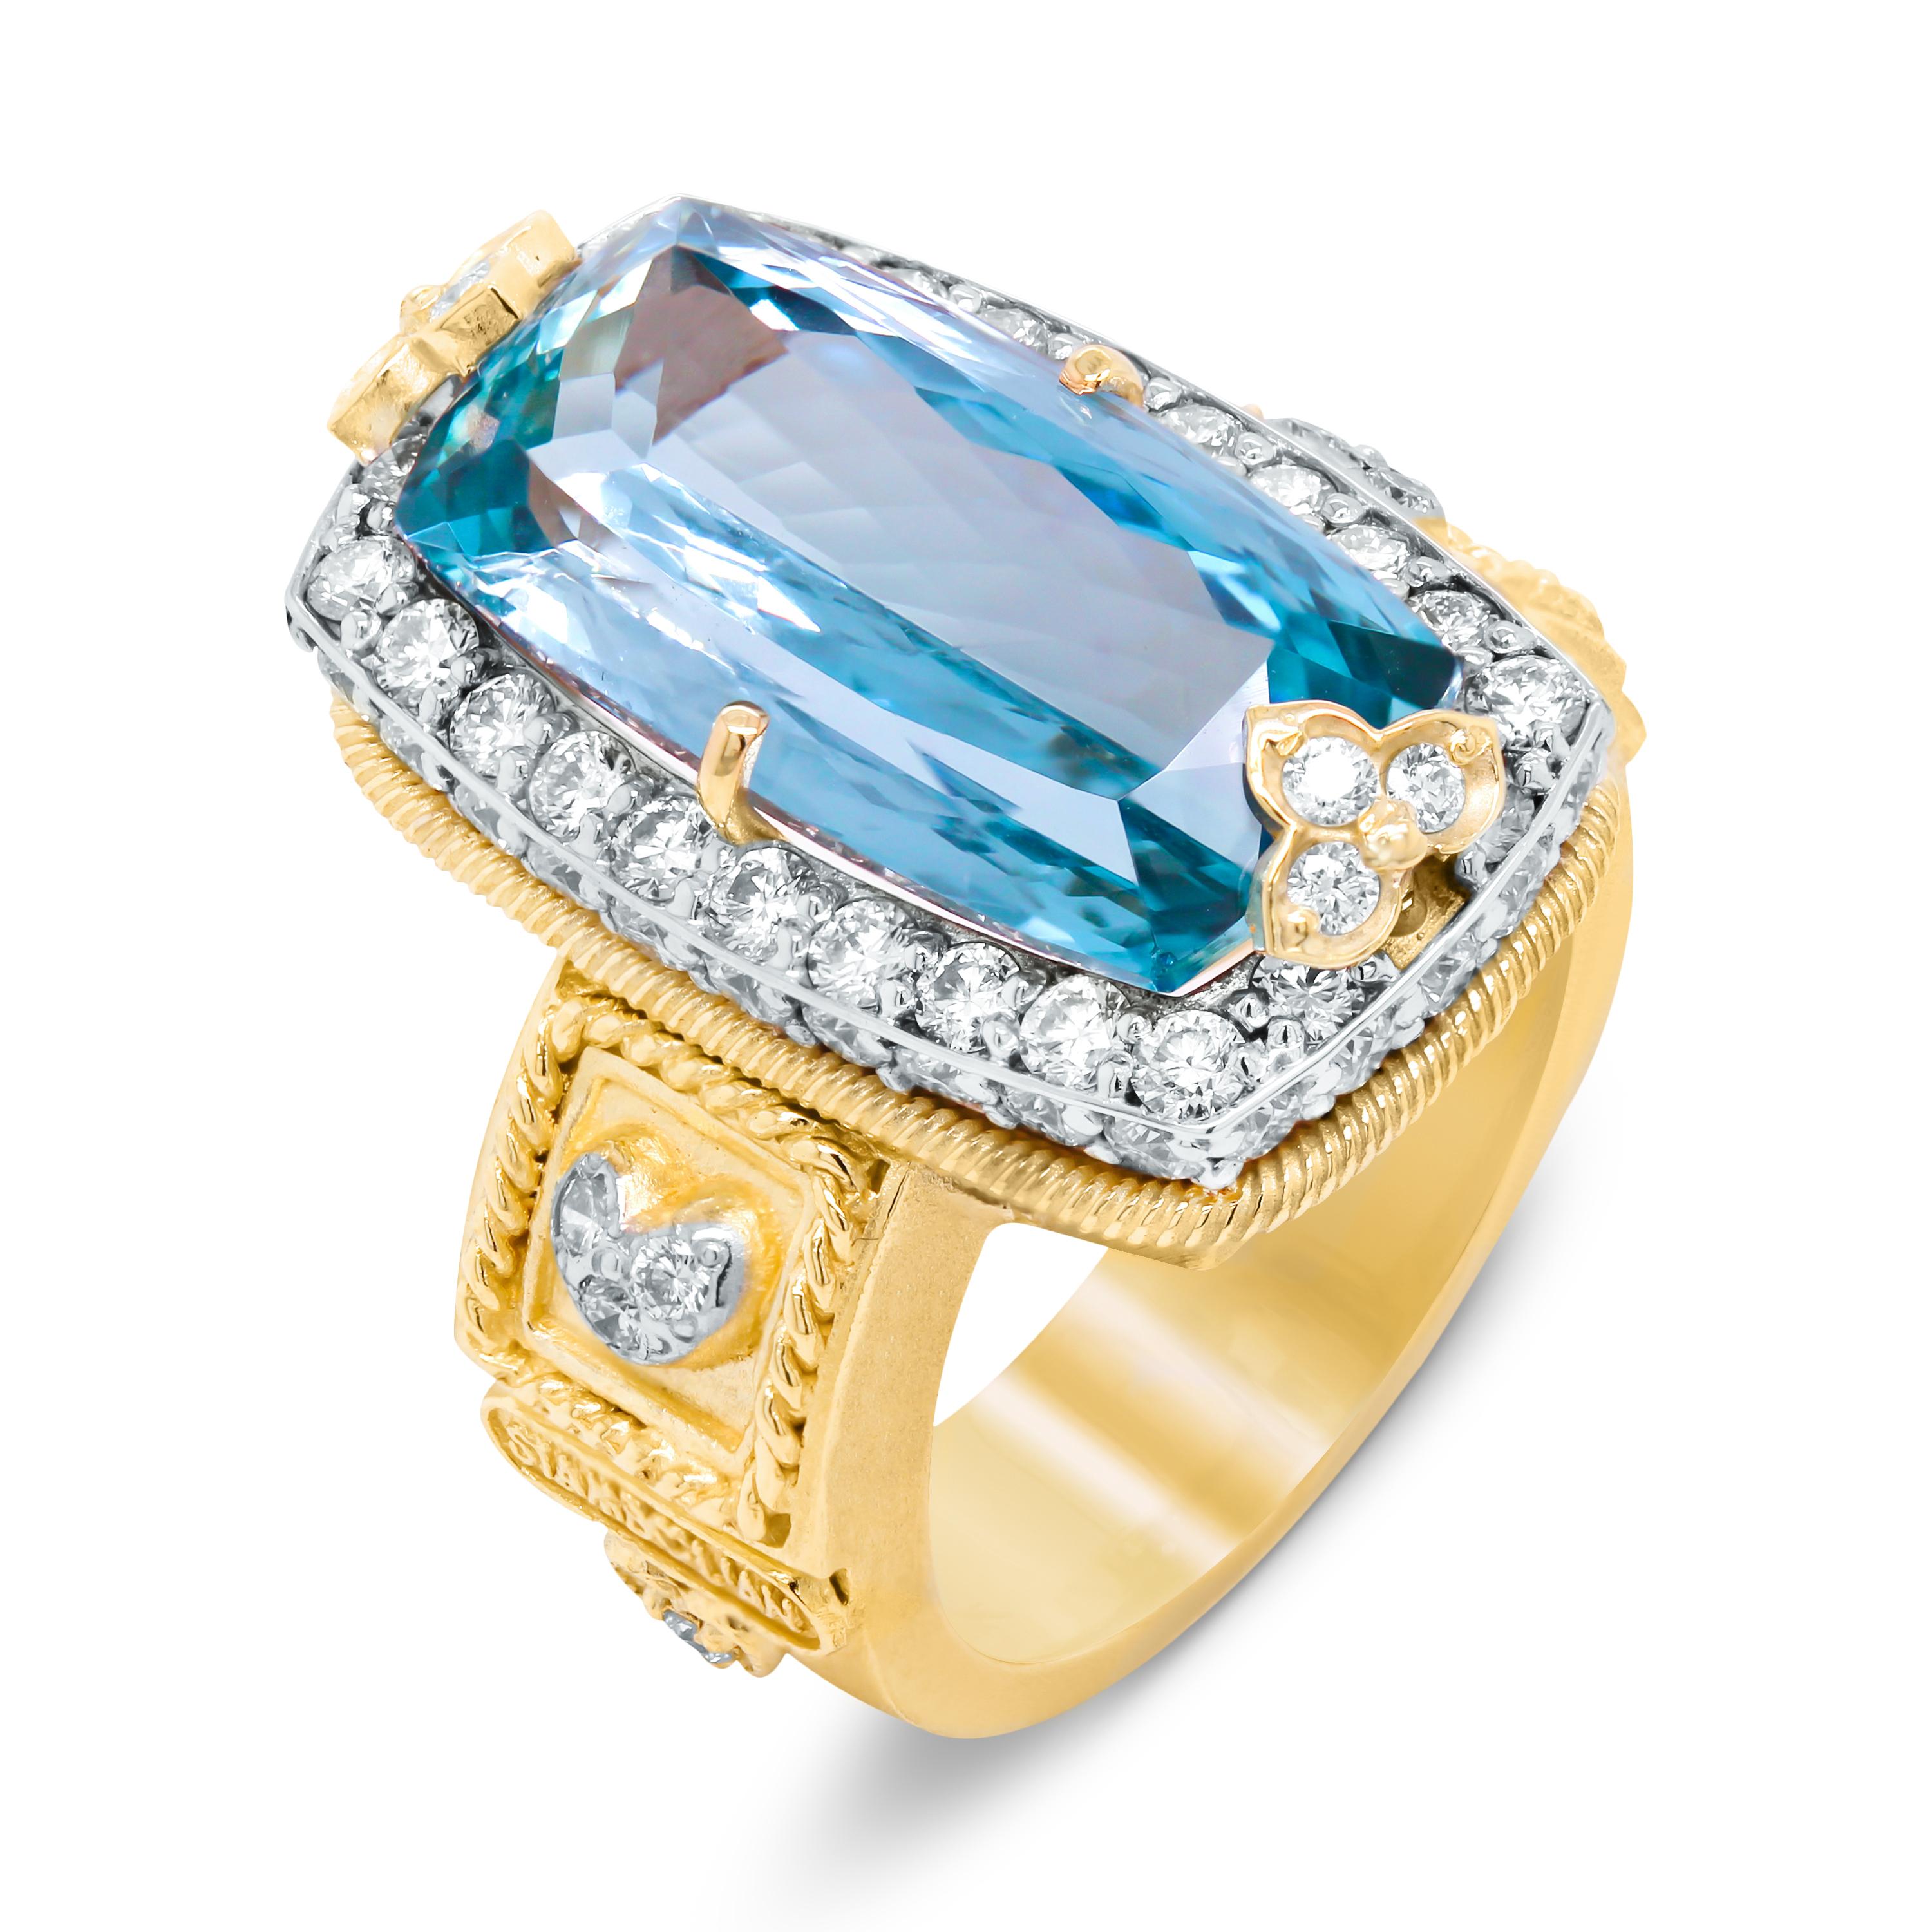 Stambolian 18K Gold Diamond 8.42 Carat Emerald Cut Aquamarine Center Ring

A one-of-a-kind ring featuring a breathtaking 8.42 carat rectangular, emerald-cut Aquamarine center

This stunning ring is crafted in solid 18k green gold with two gold and